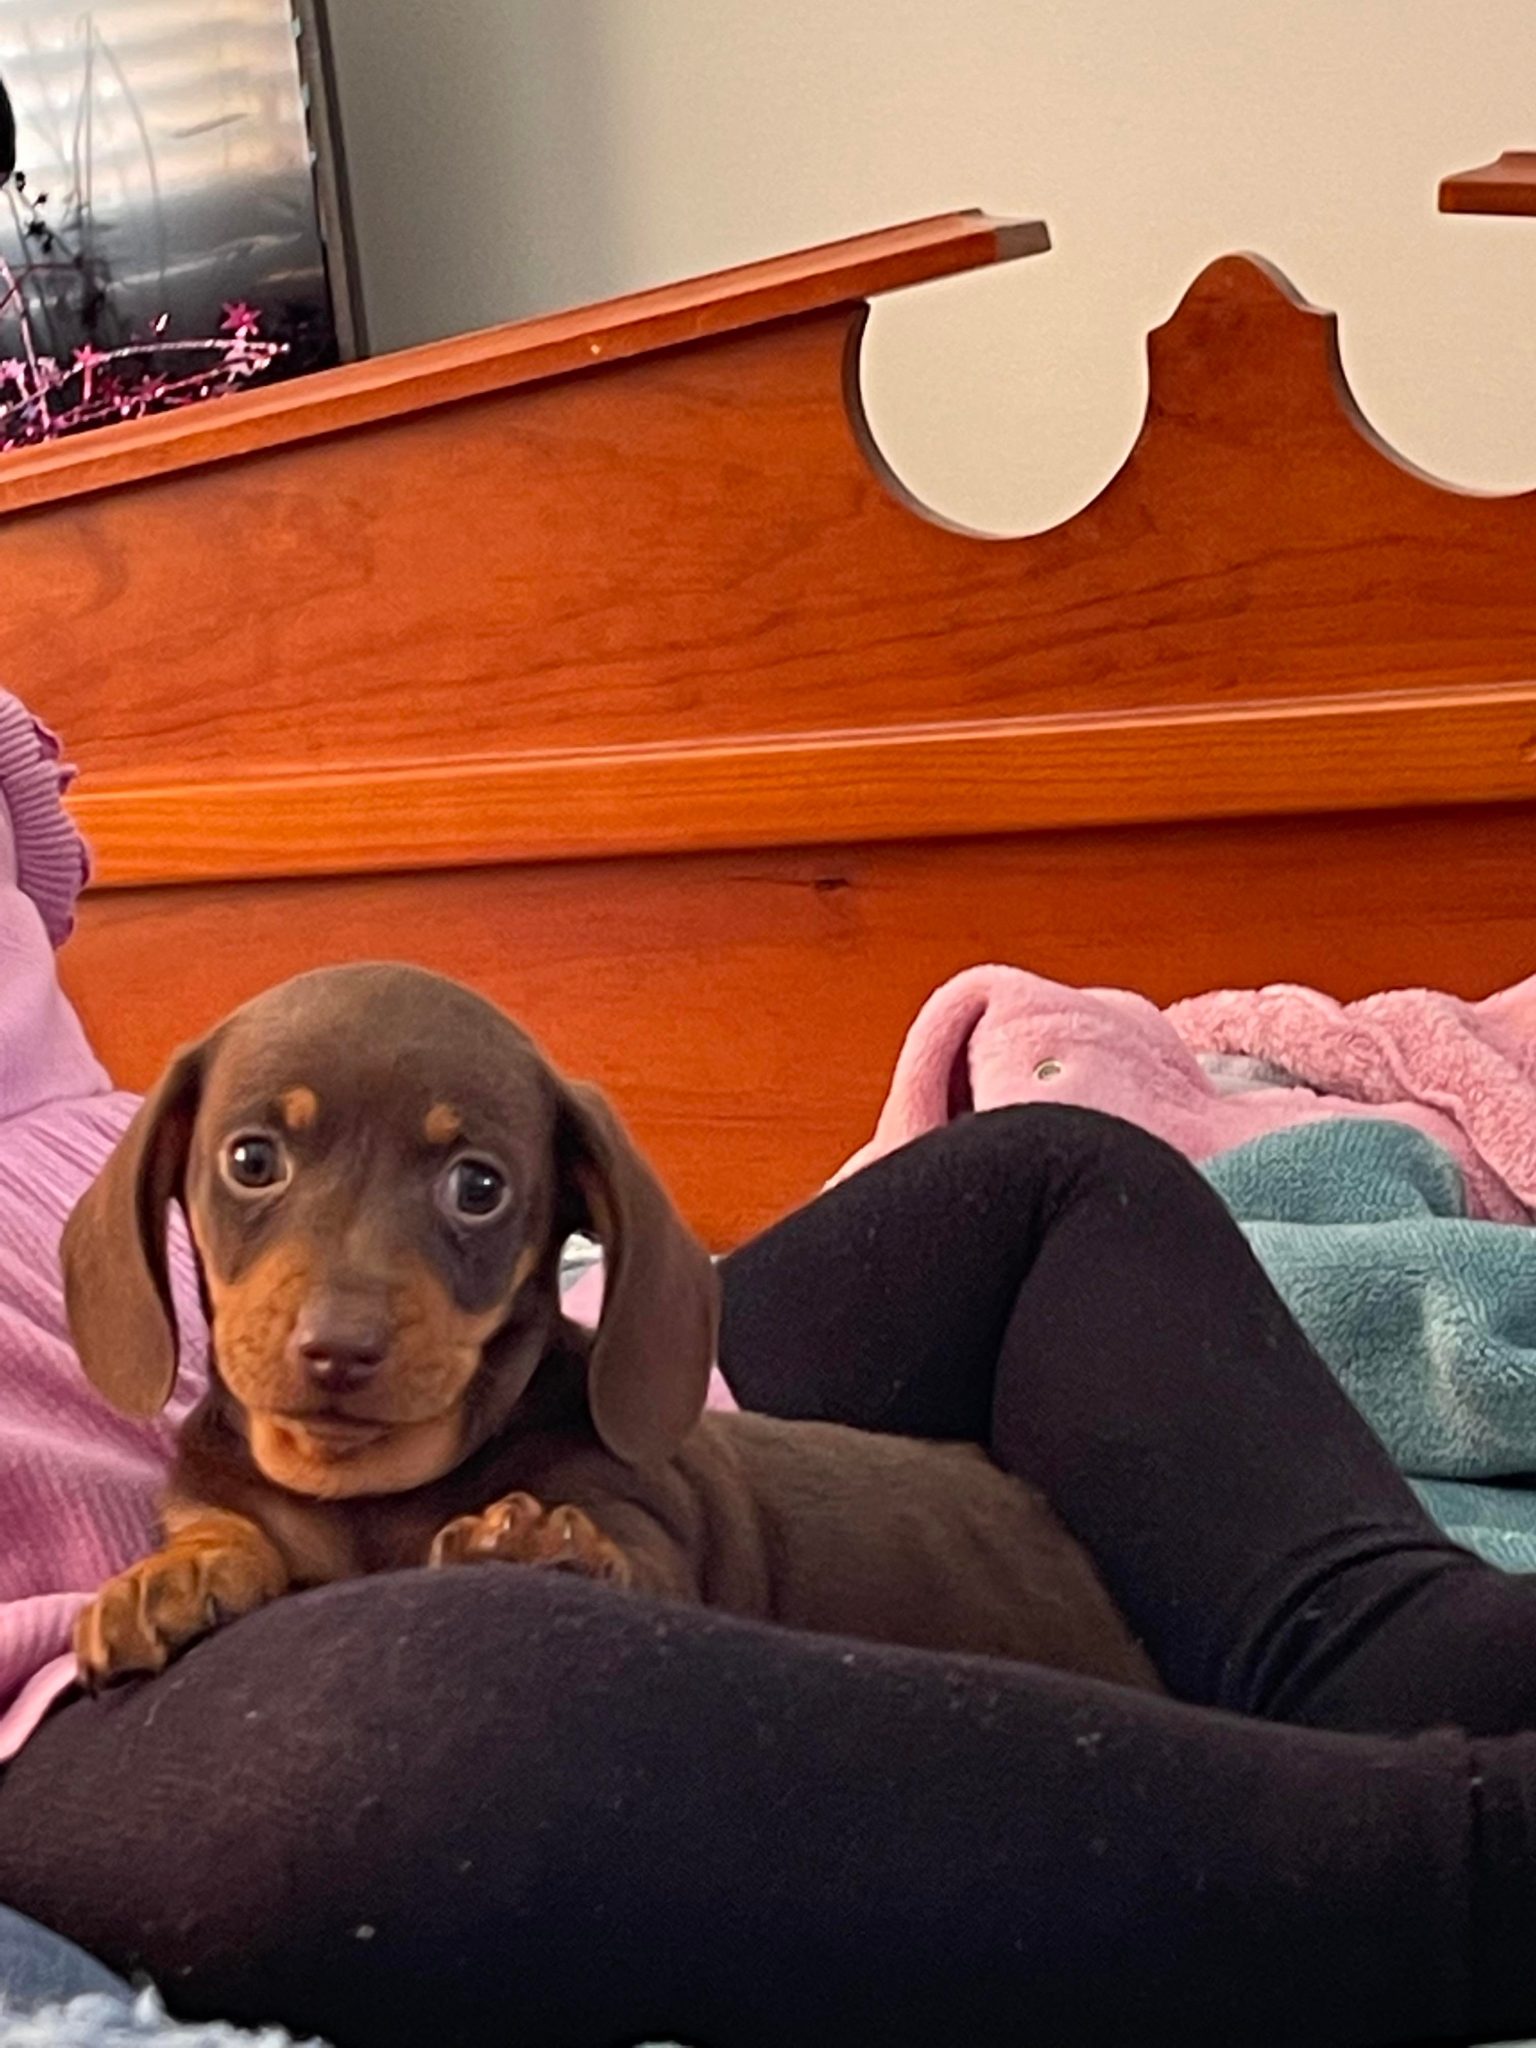 dachshund looking for loving homes